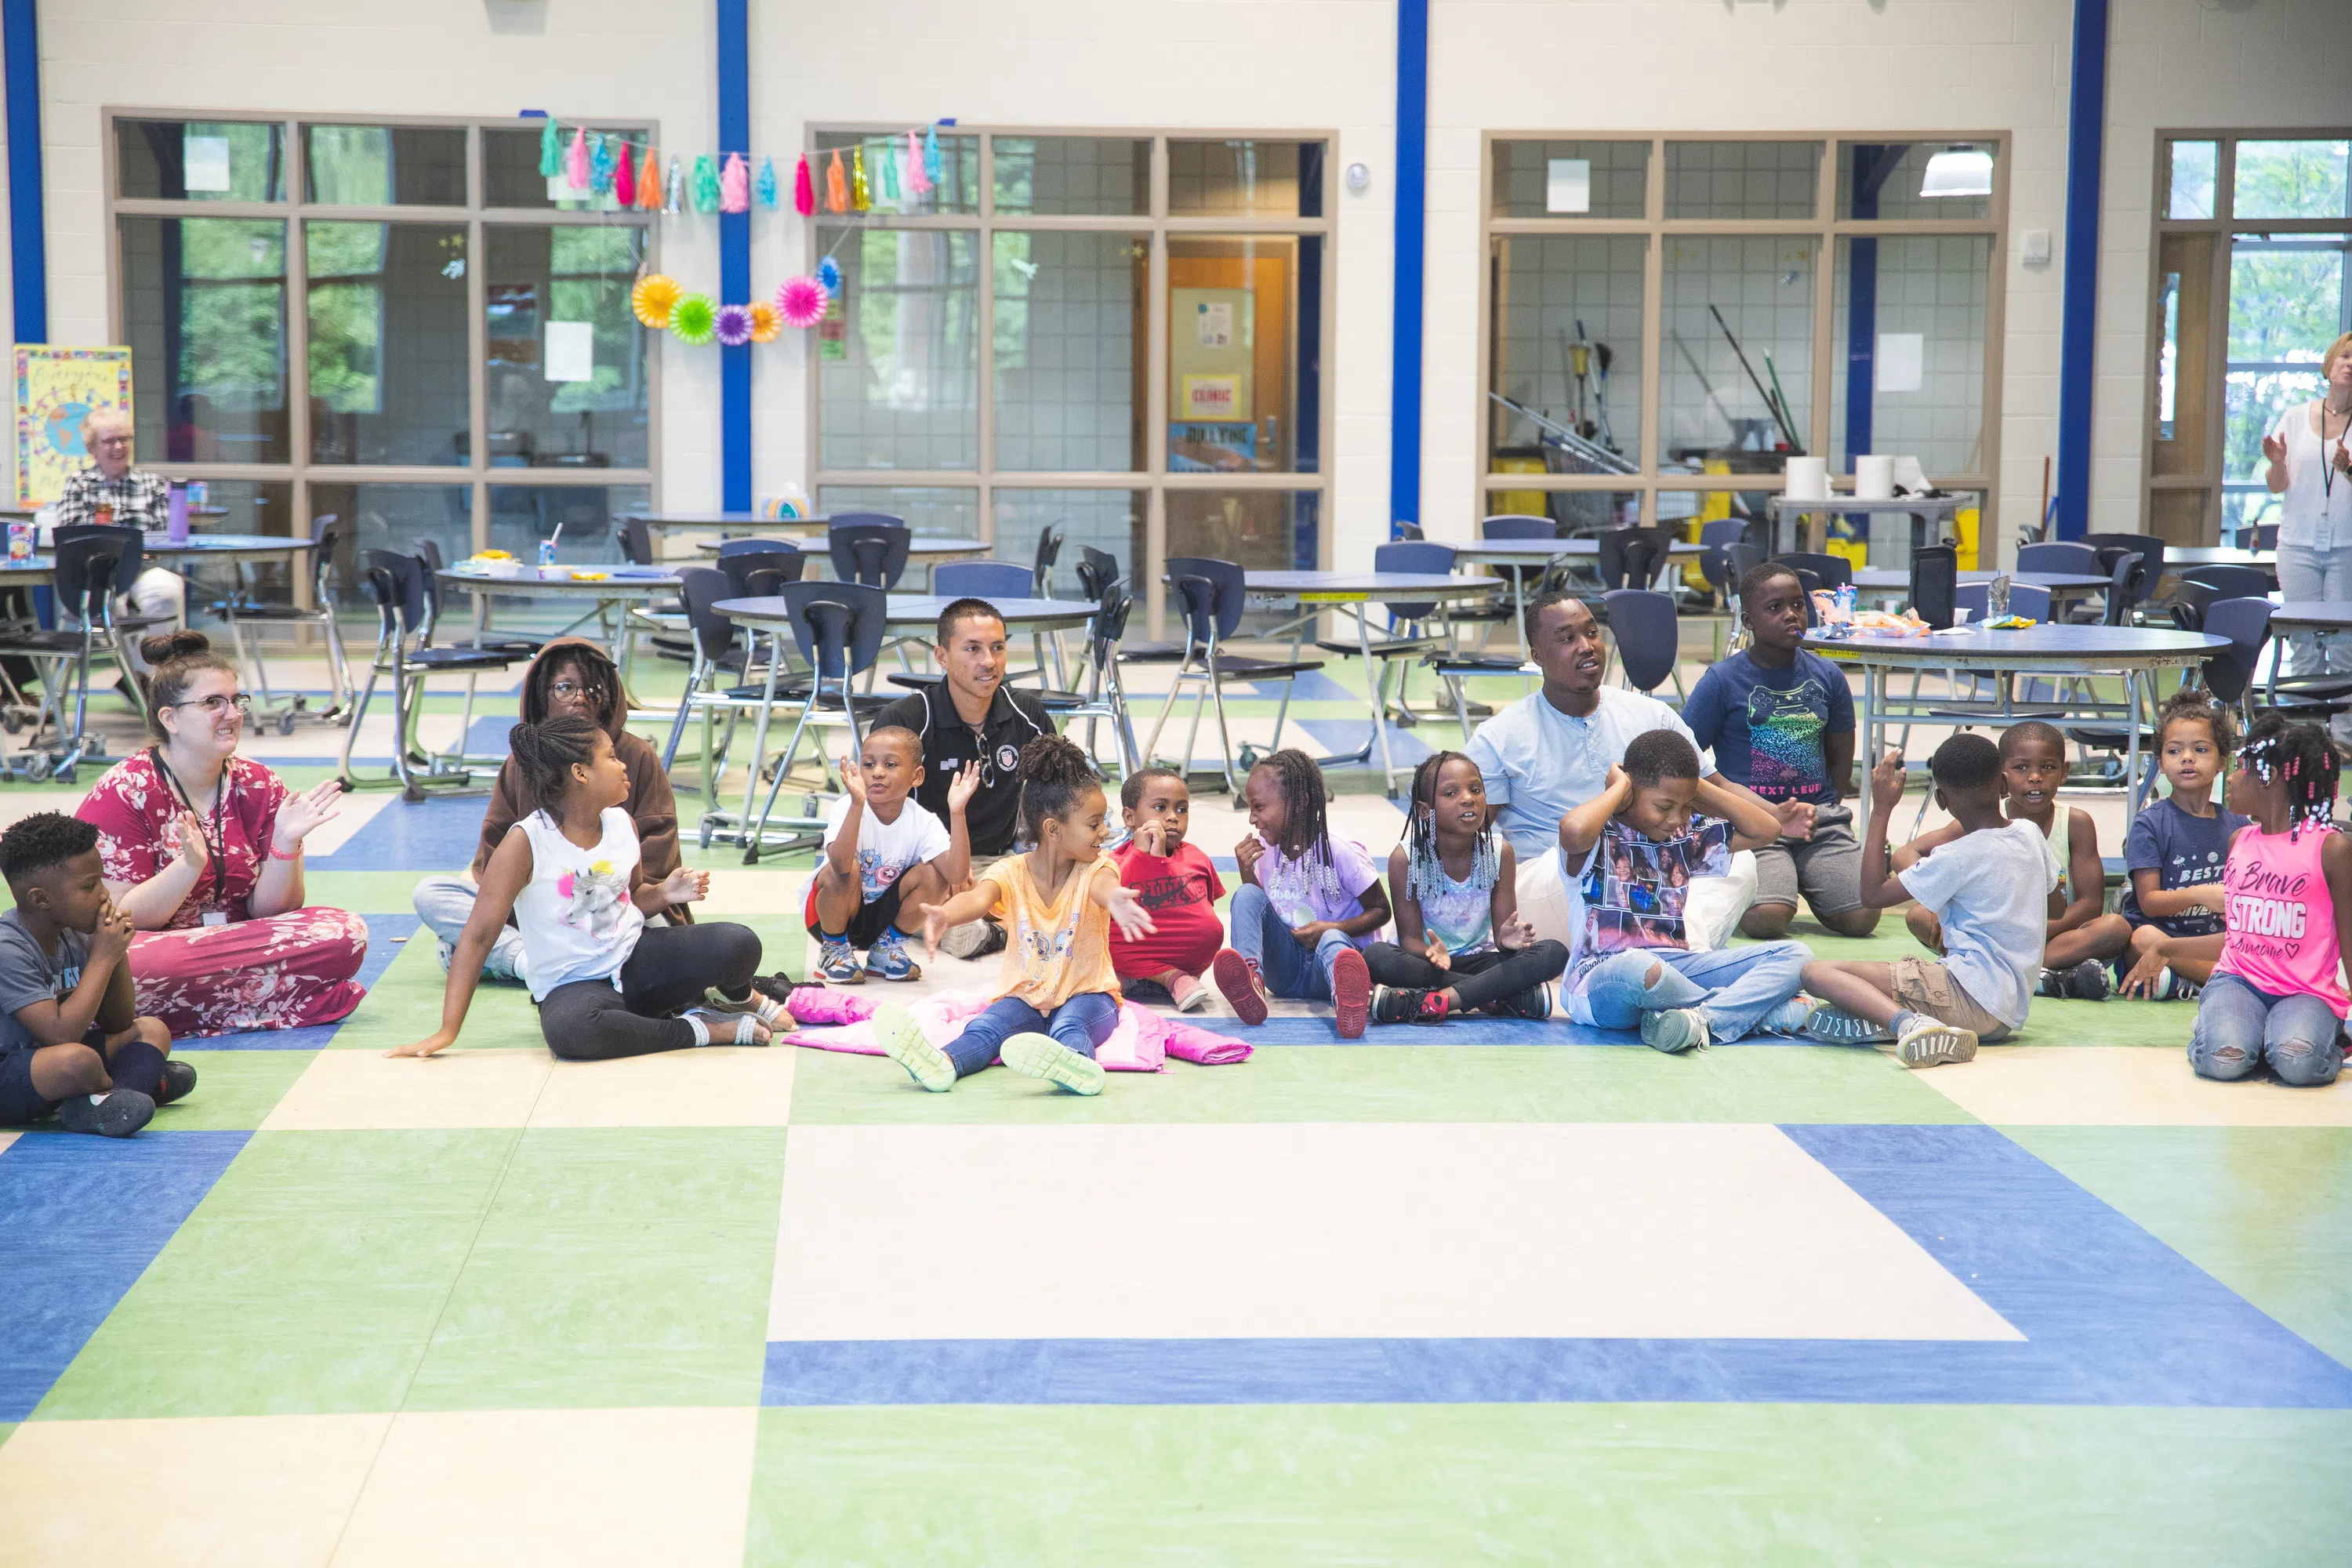 UWF students interacting with children in a cafeteria at an elementary school.